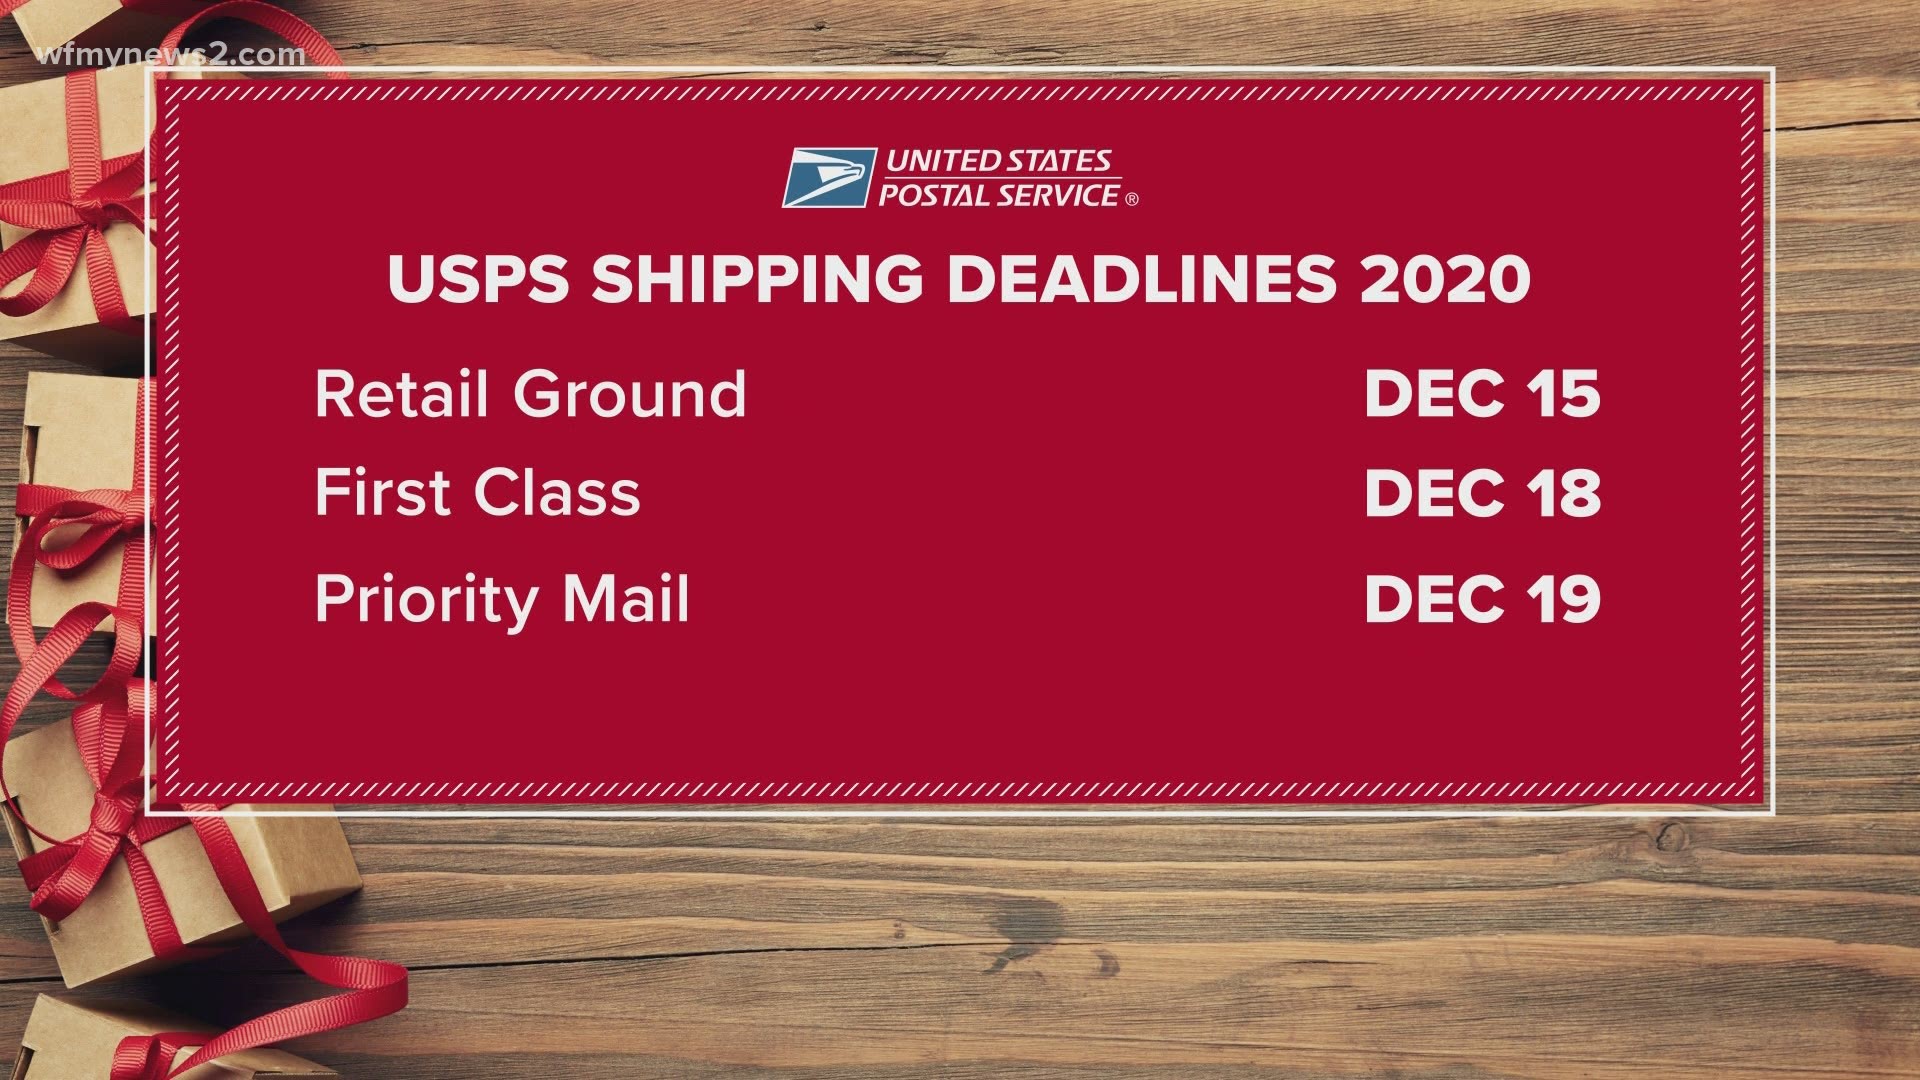 USPS, FedEx, and UPS all have different deadlines to send packages for Christmas. They start at early as Dec. 15.